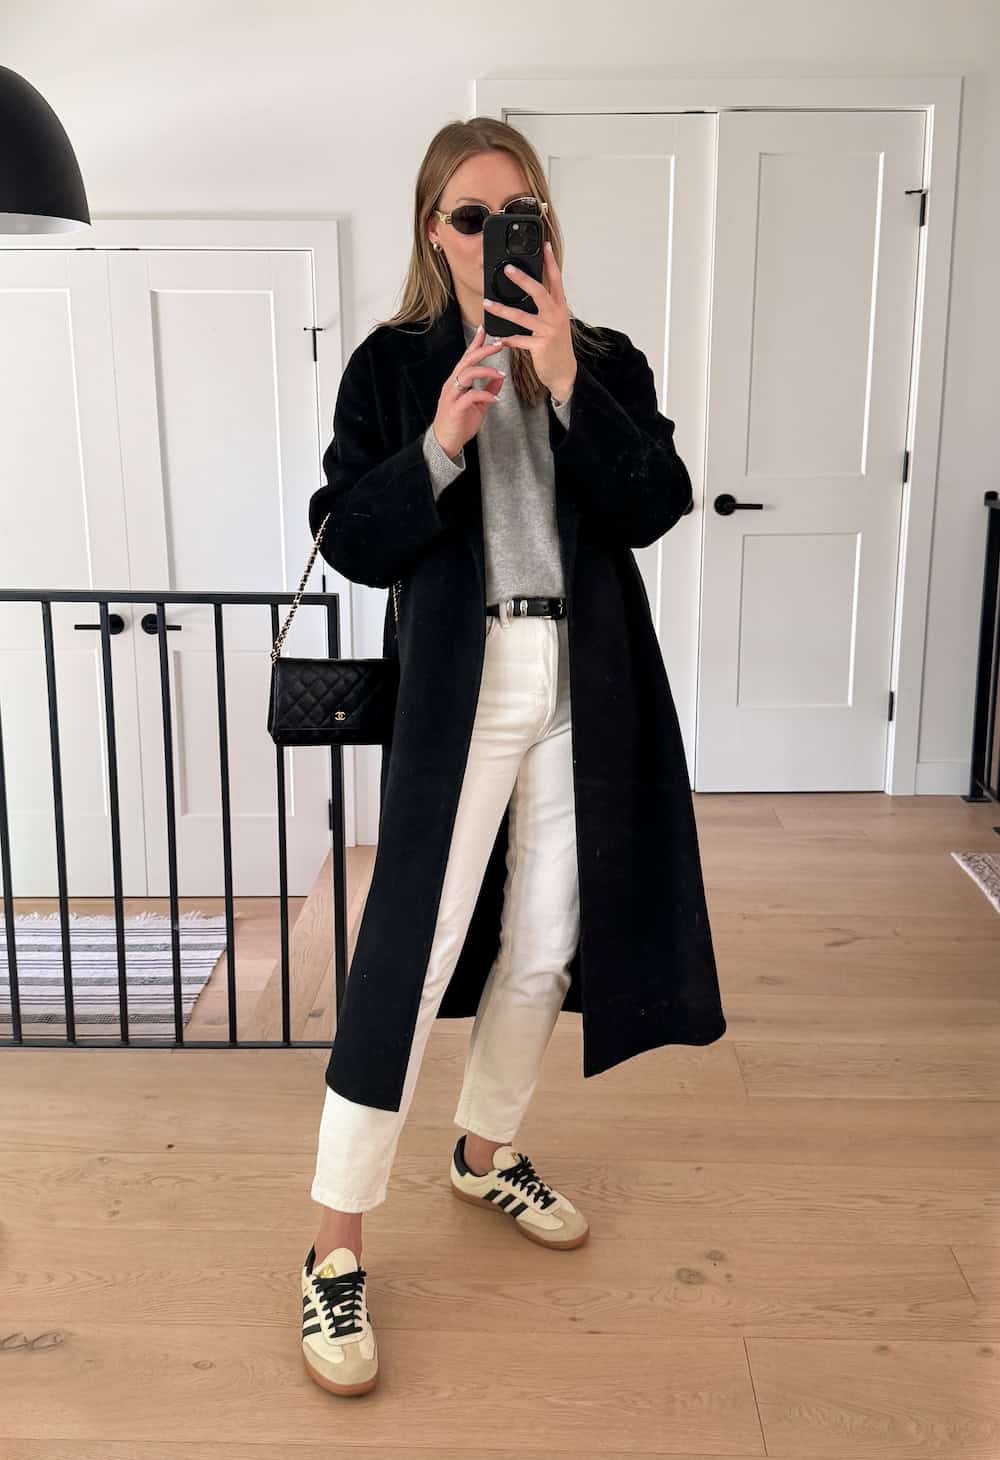 Christal wearing white jeans, a grey sweater, a long black coat and sneakers.